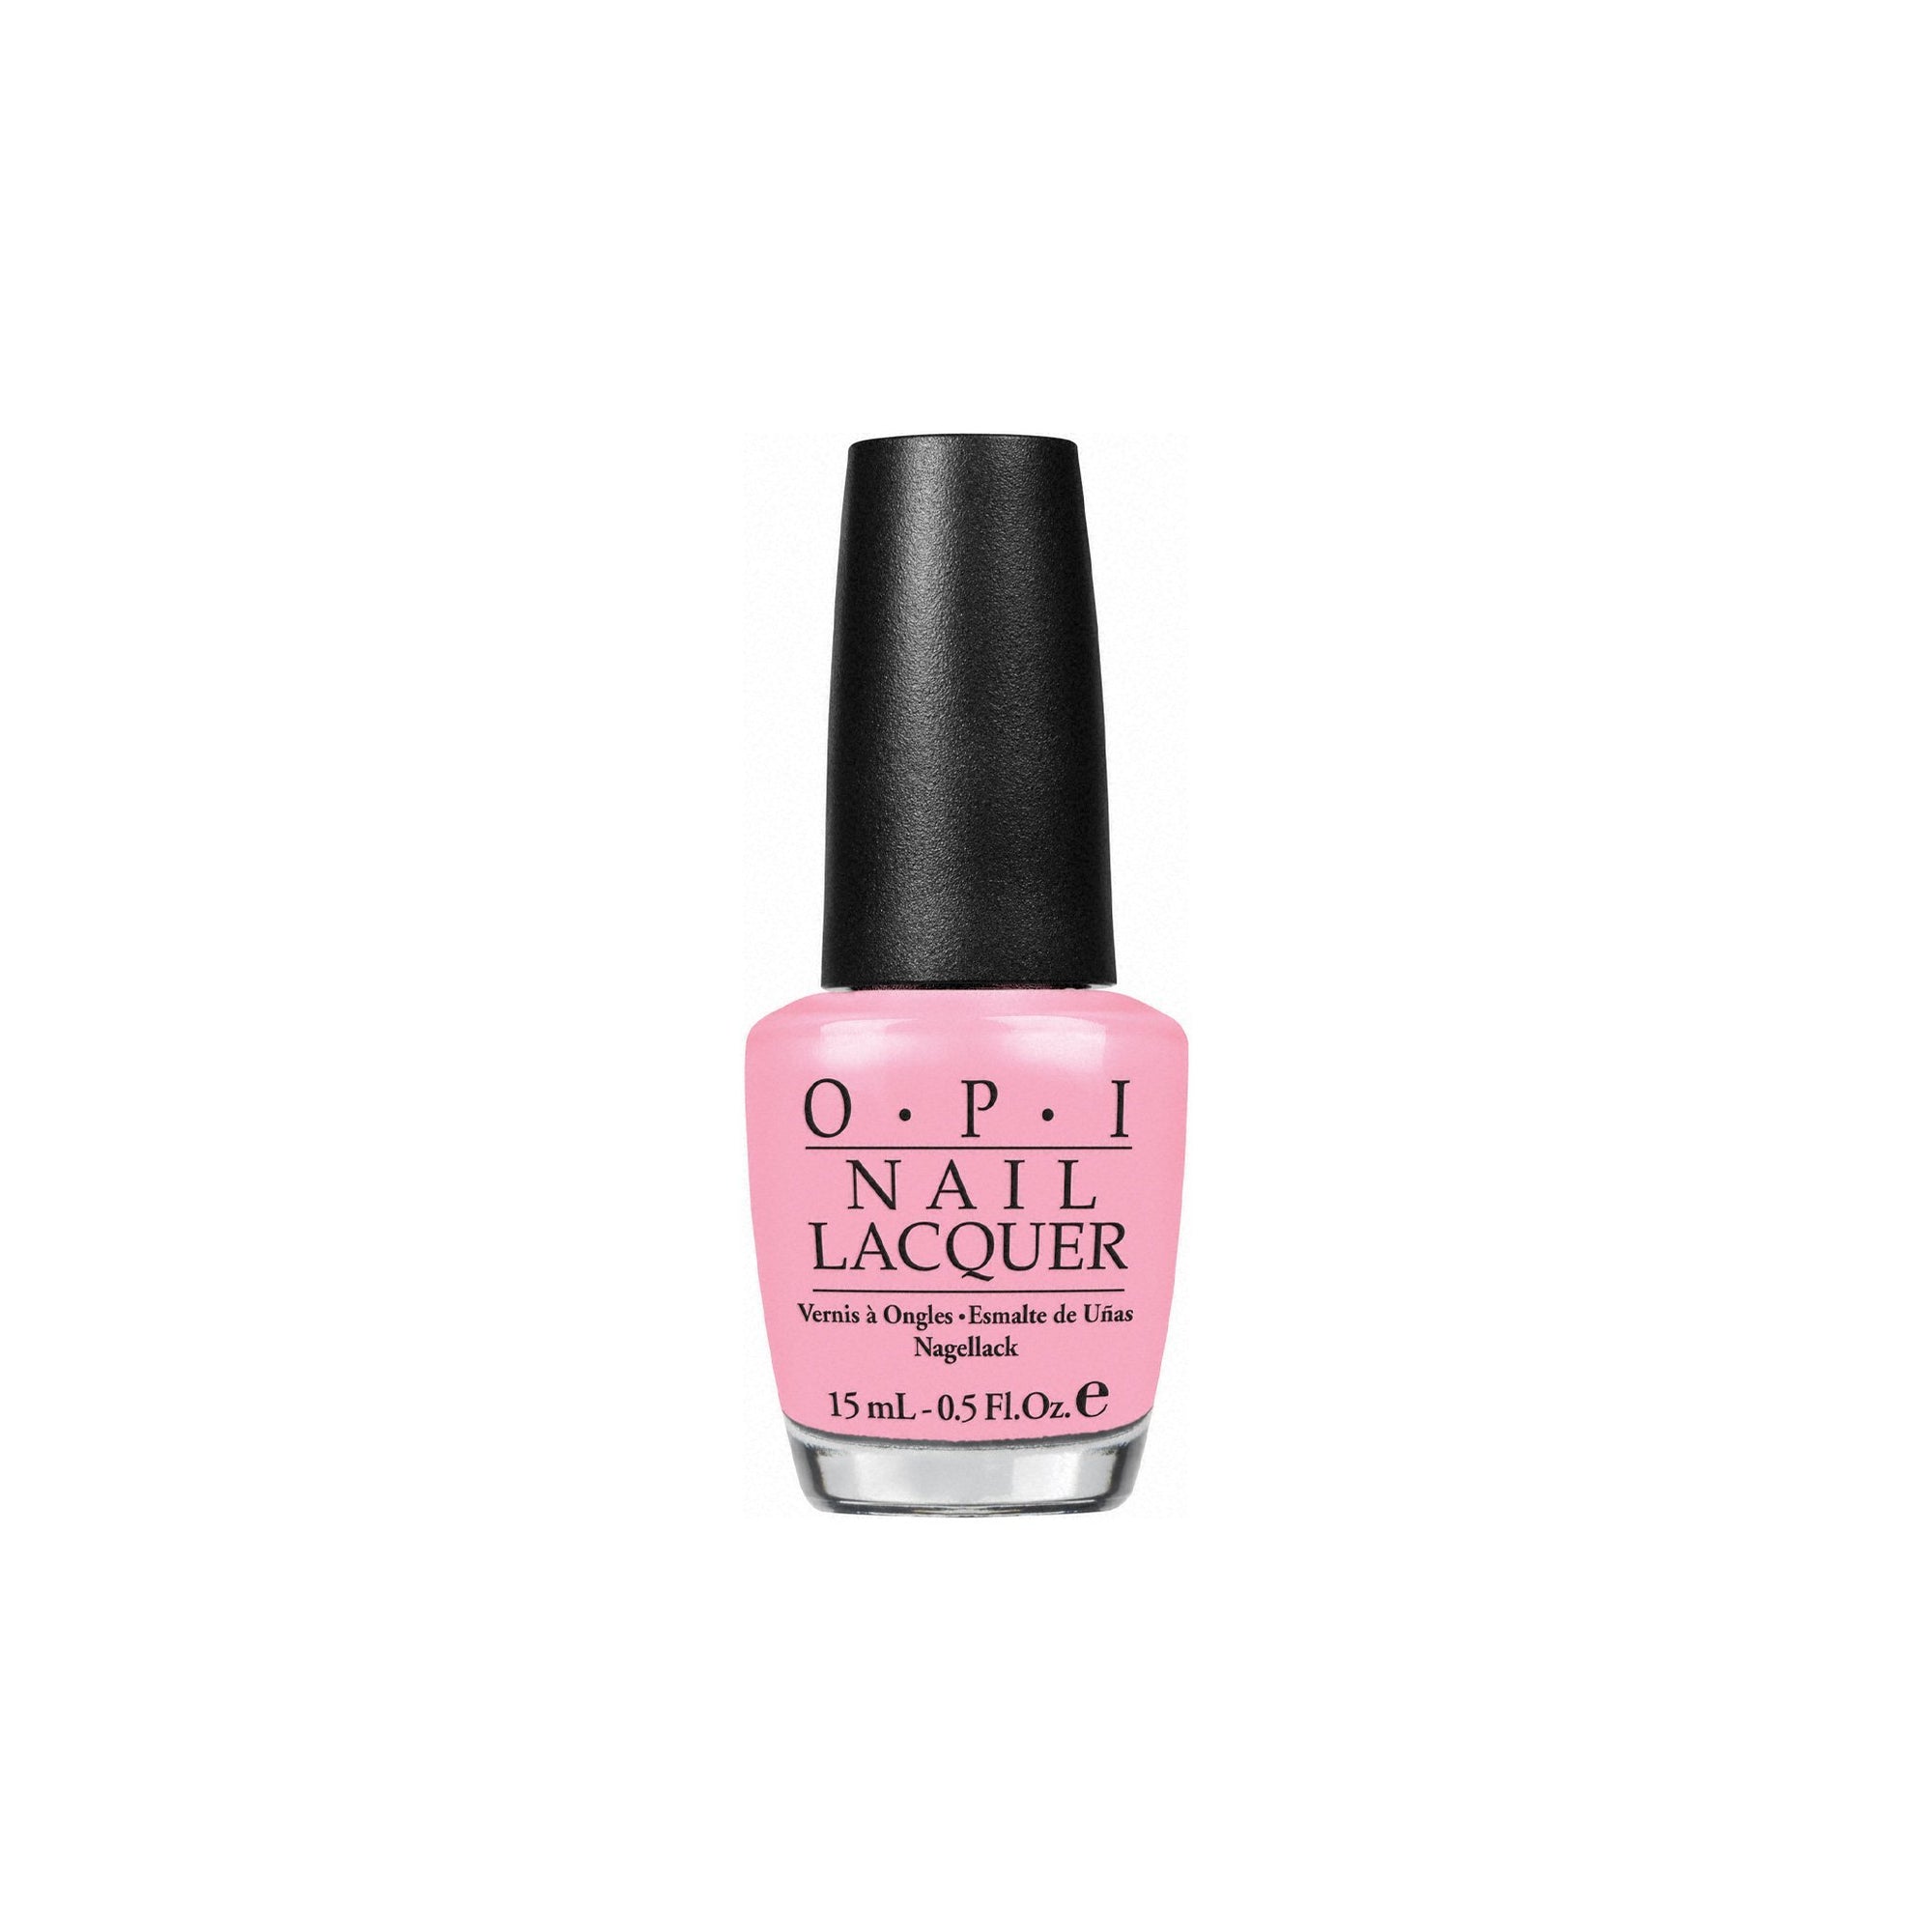 O.P.I Nail Lacquer - I Think In Pink